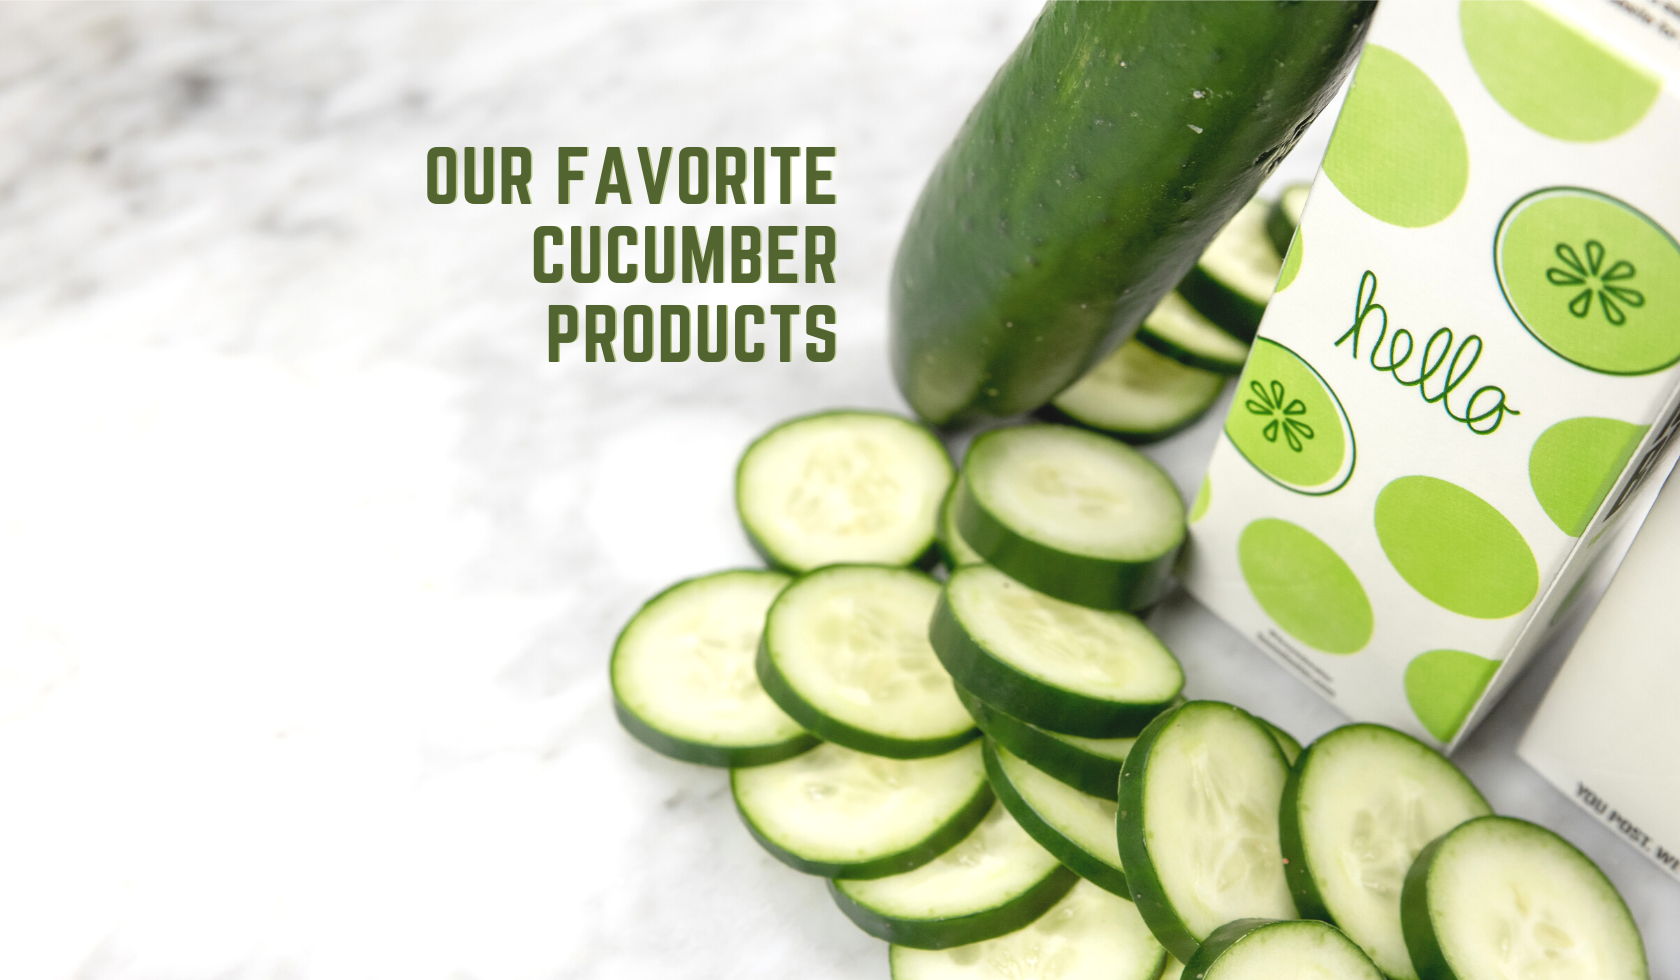 Boxed Water's Favorite Cucumber Products